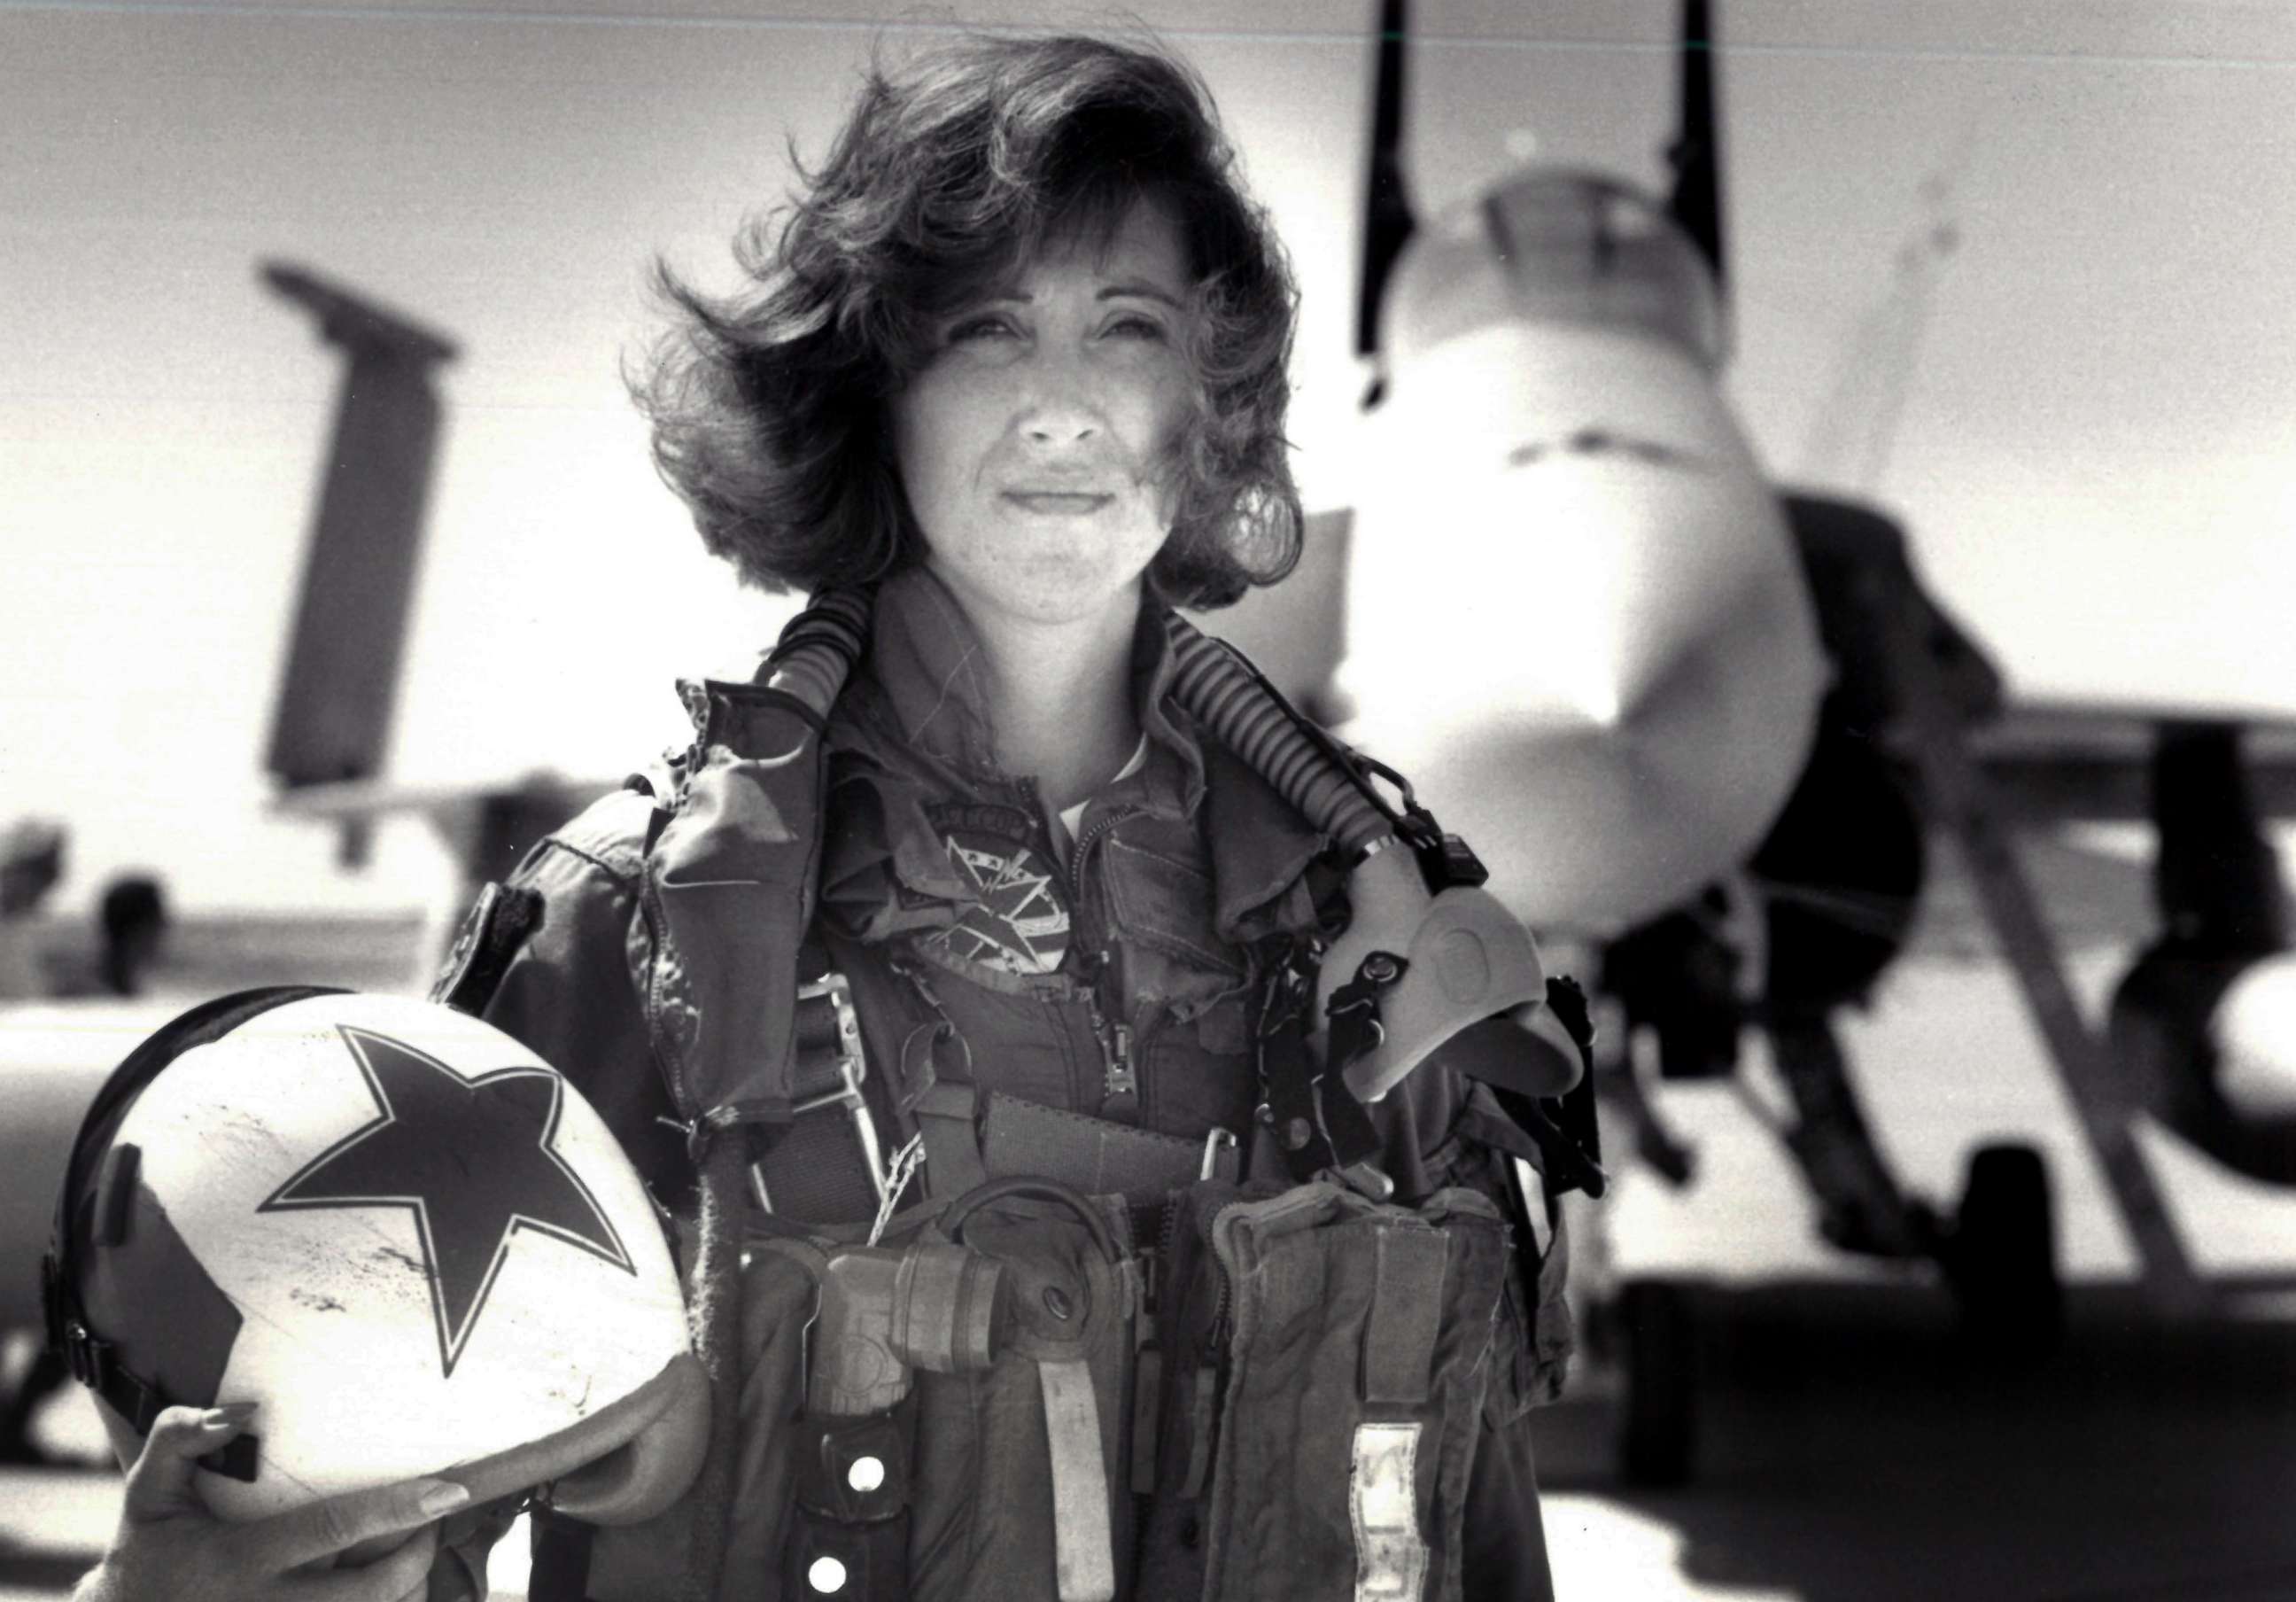 PHOTO: Lt. Tammie J. Shults, one of the first women to fly Navy tactical aircraft, poses in front of an F/A-18A in 1992. After leaving active duty in early 1993, Shults served in the Navy Reserve until 2001.